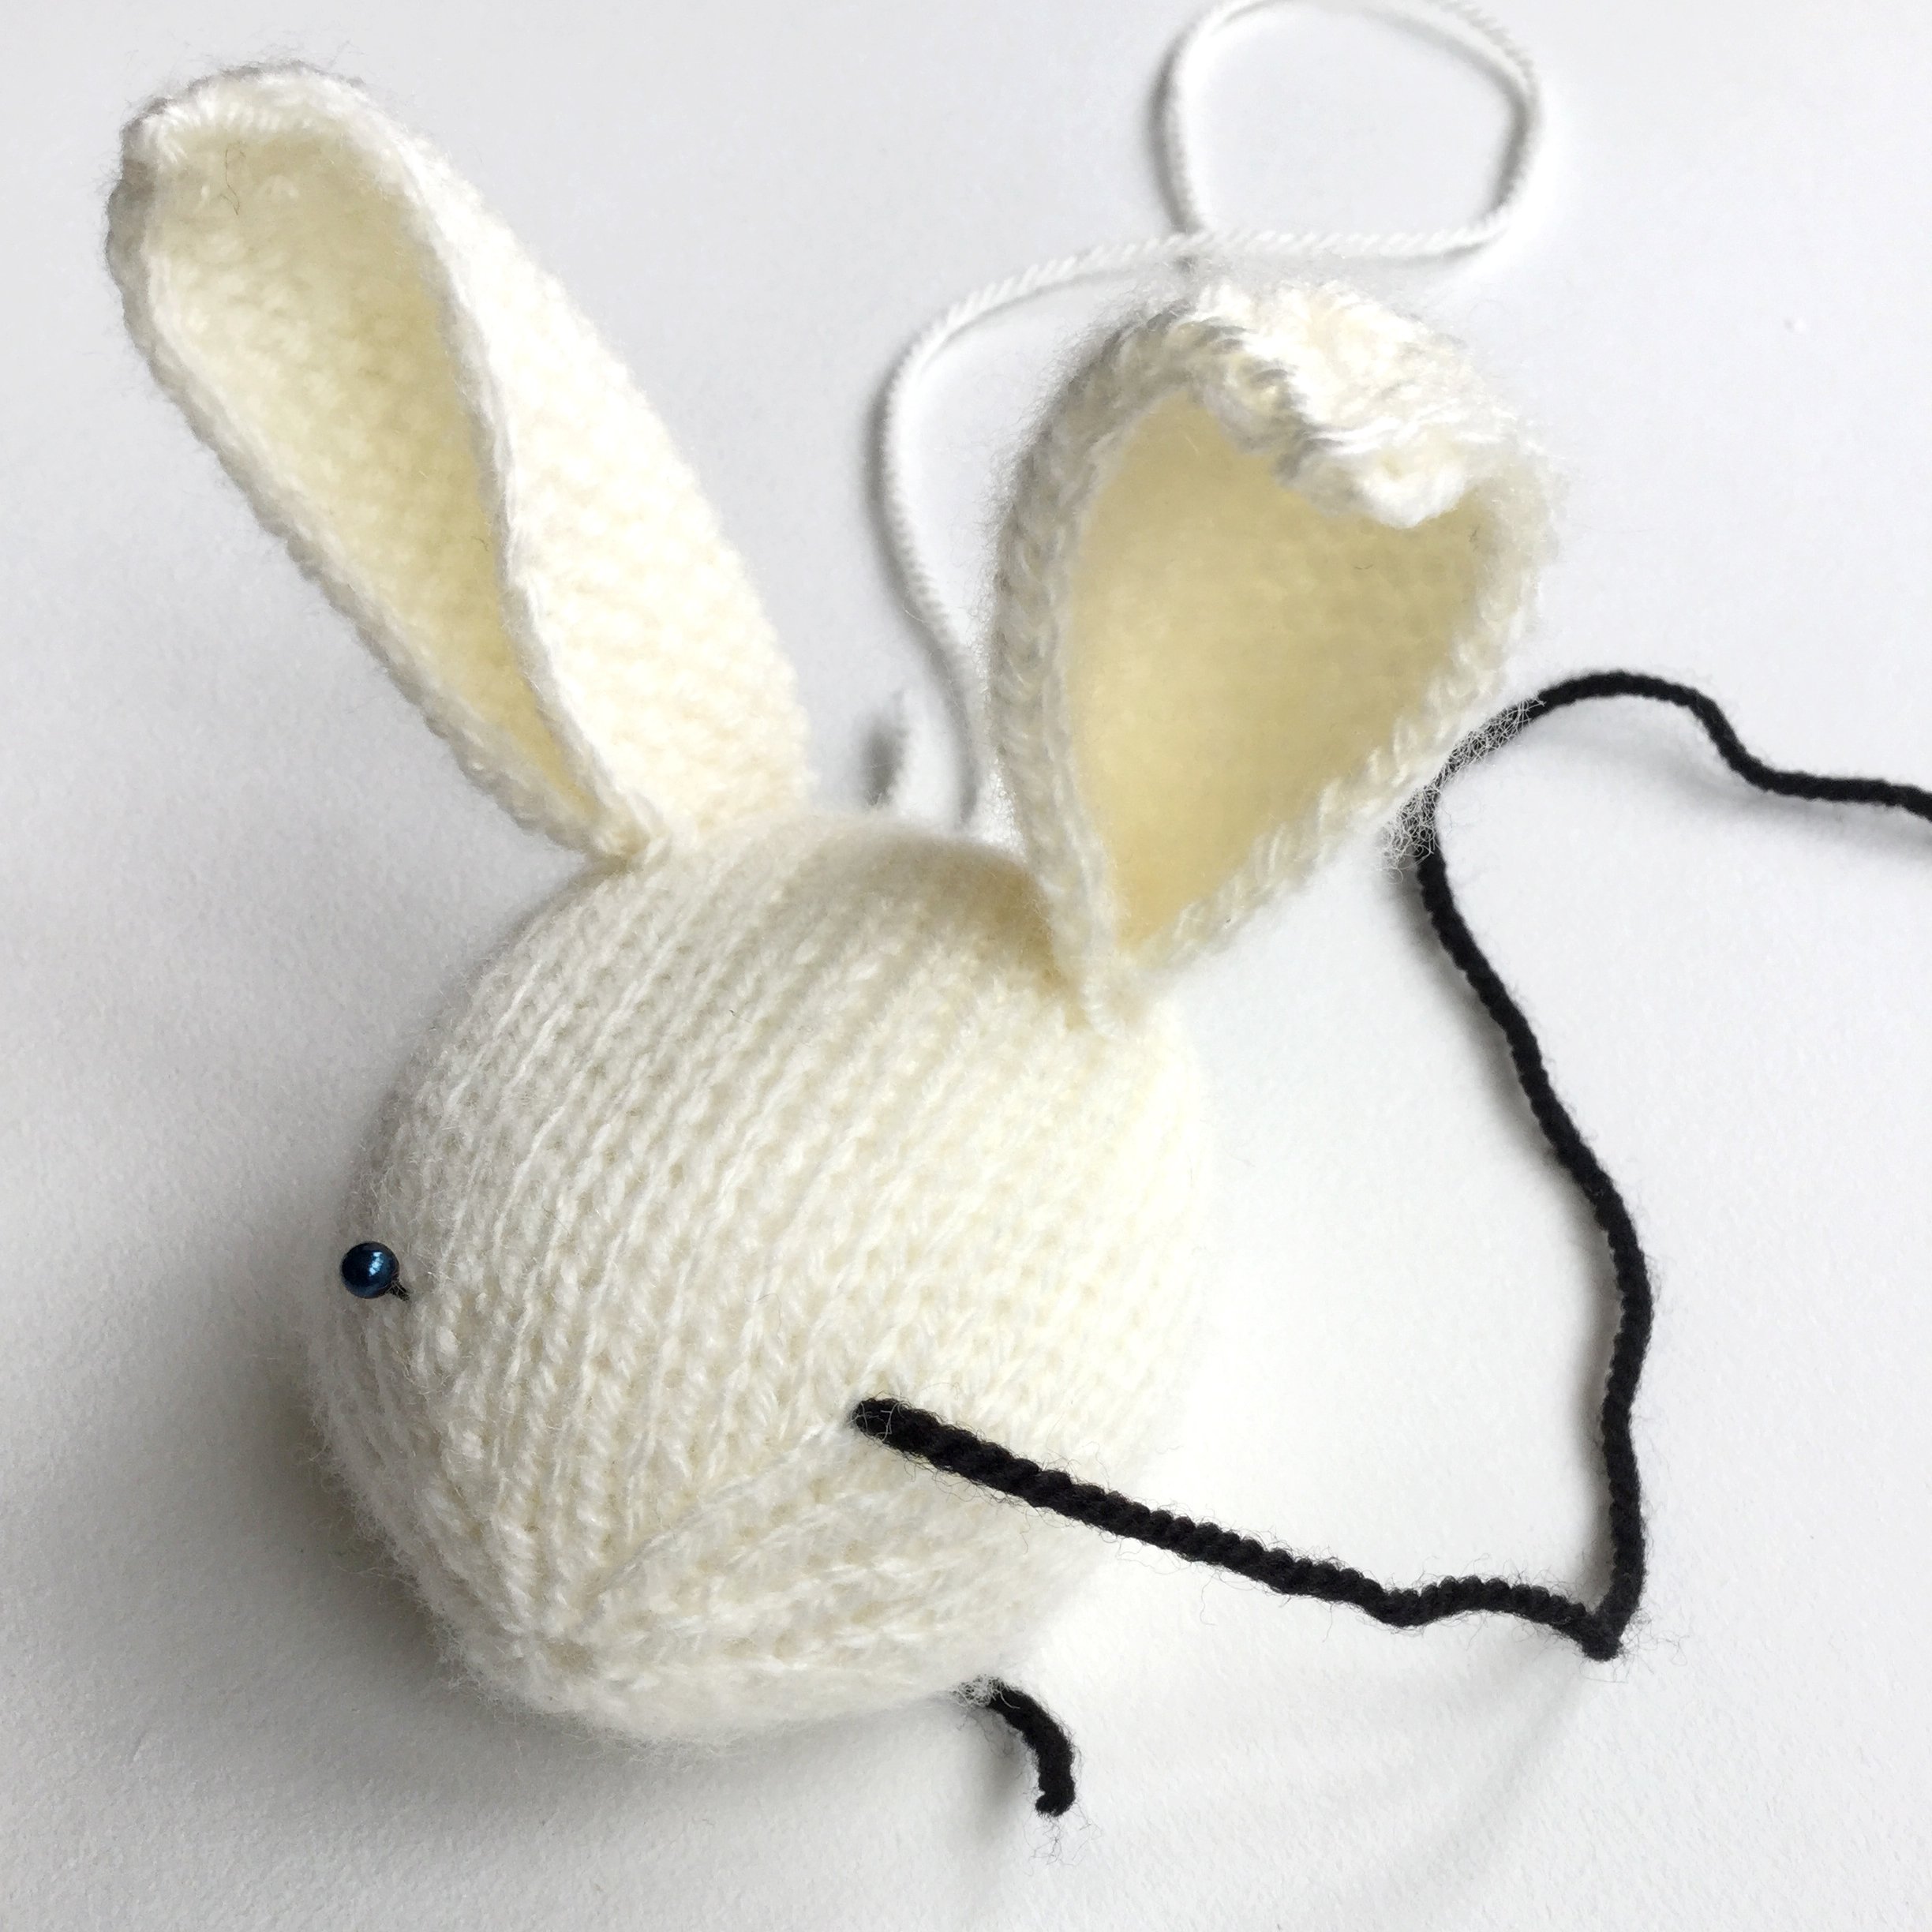 How to Sew Eyes to a Knitted Toy – Knitting by Post